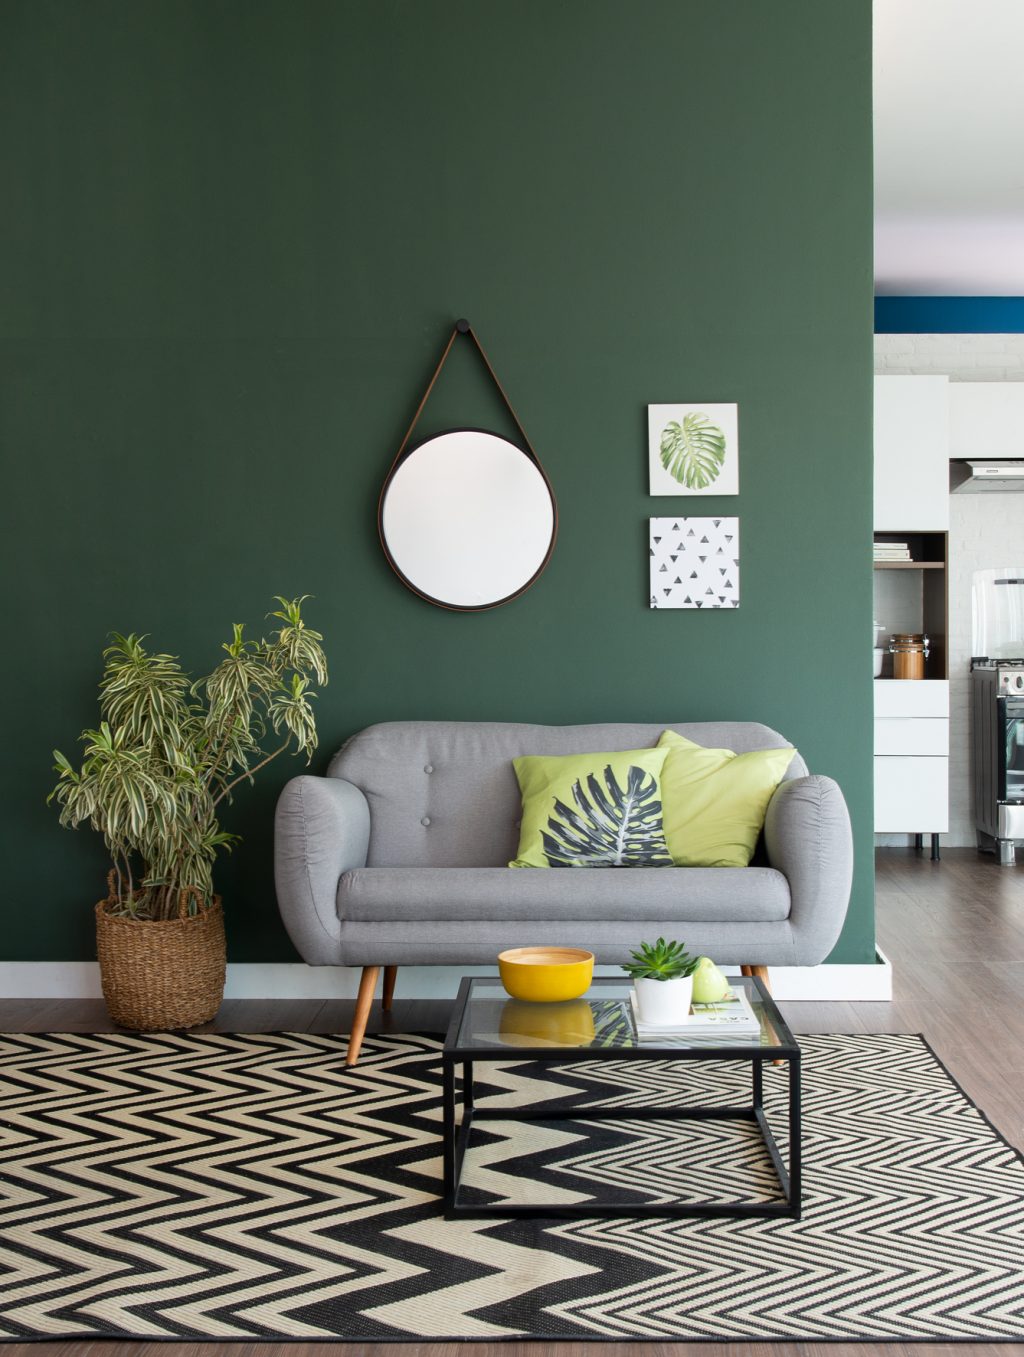 18- Spring decor in the green living room with leaf prints